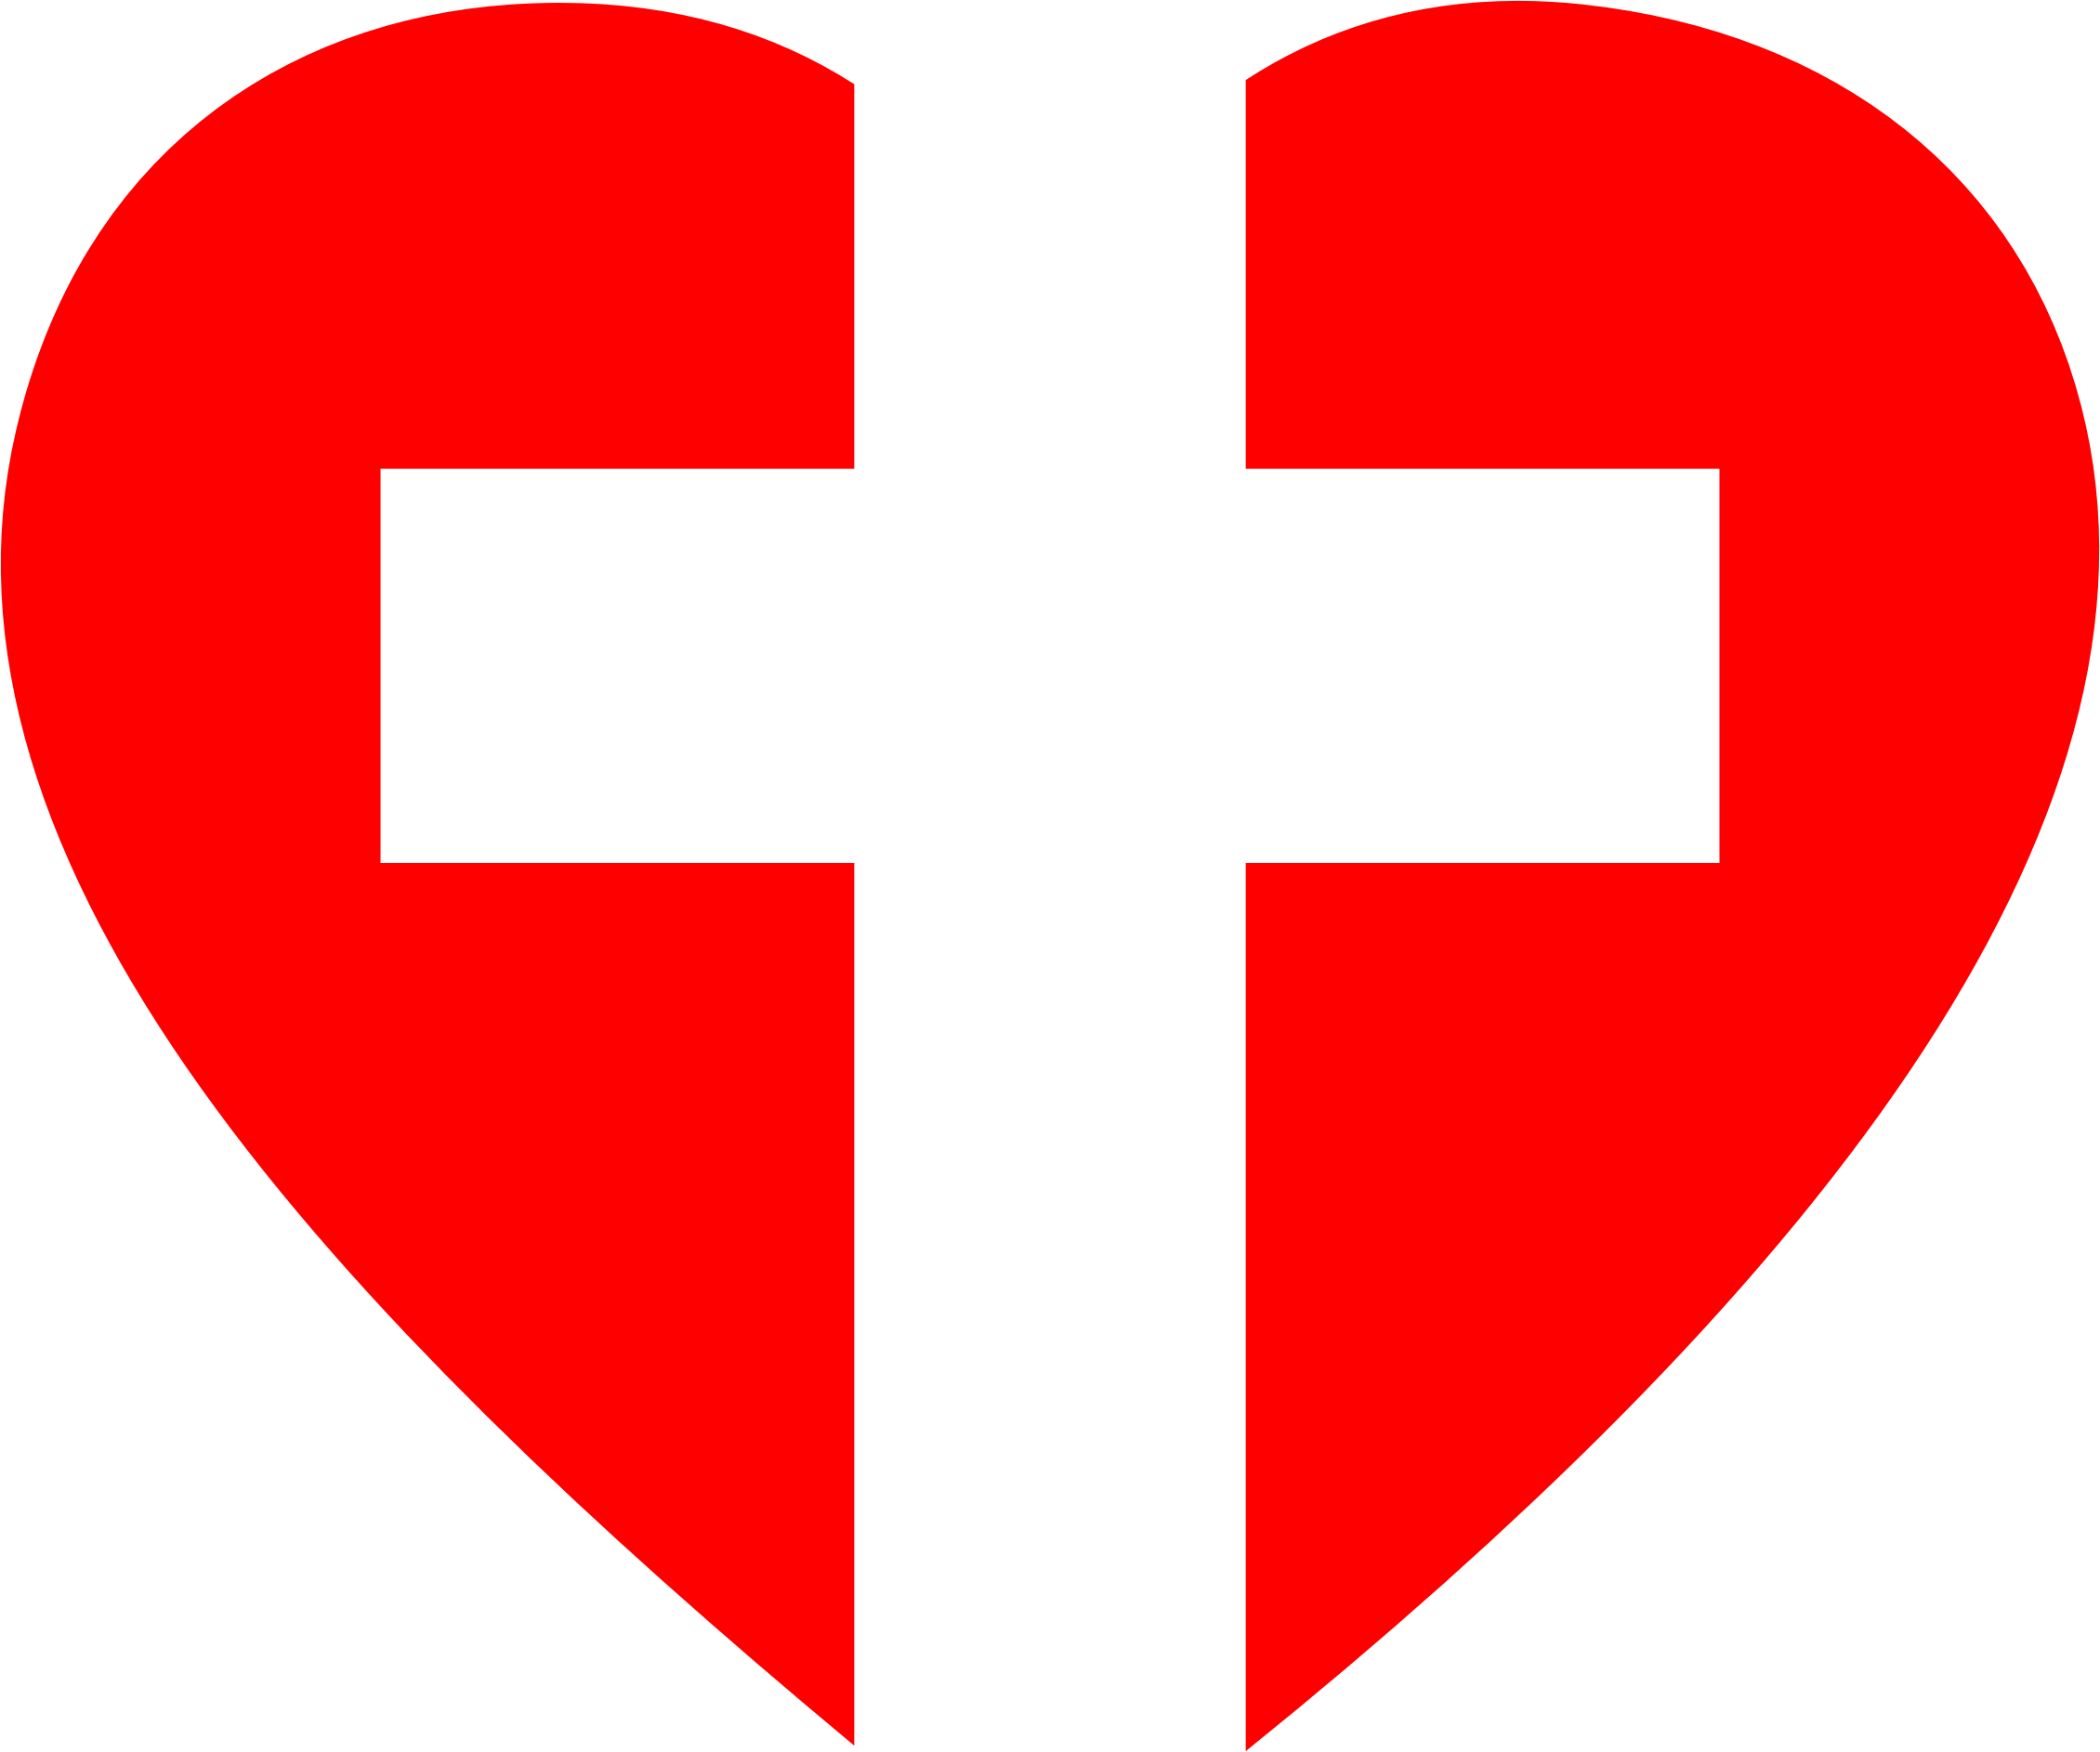 Red Cross Heart Logo - American red cross picture library stock - RR collections